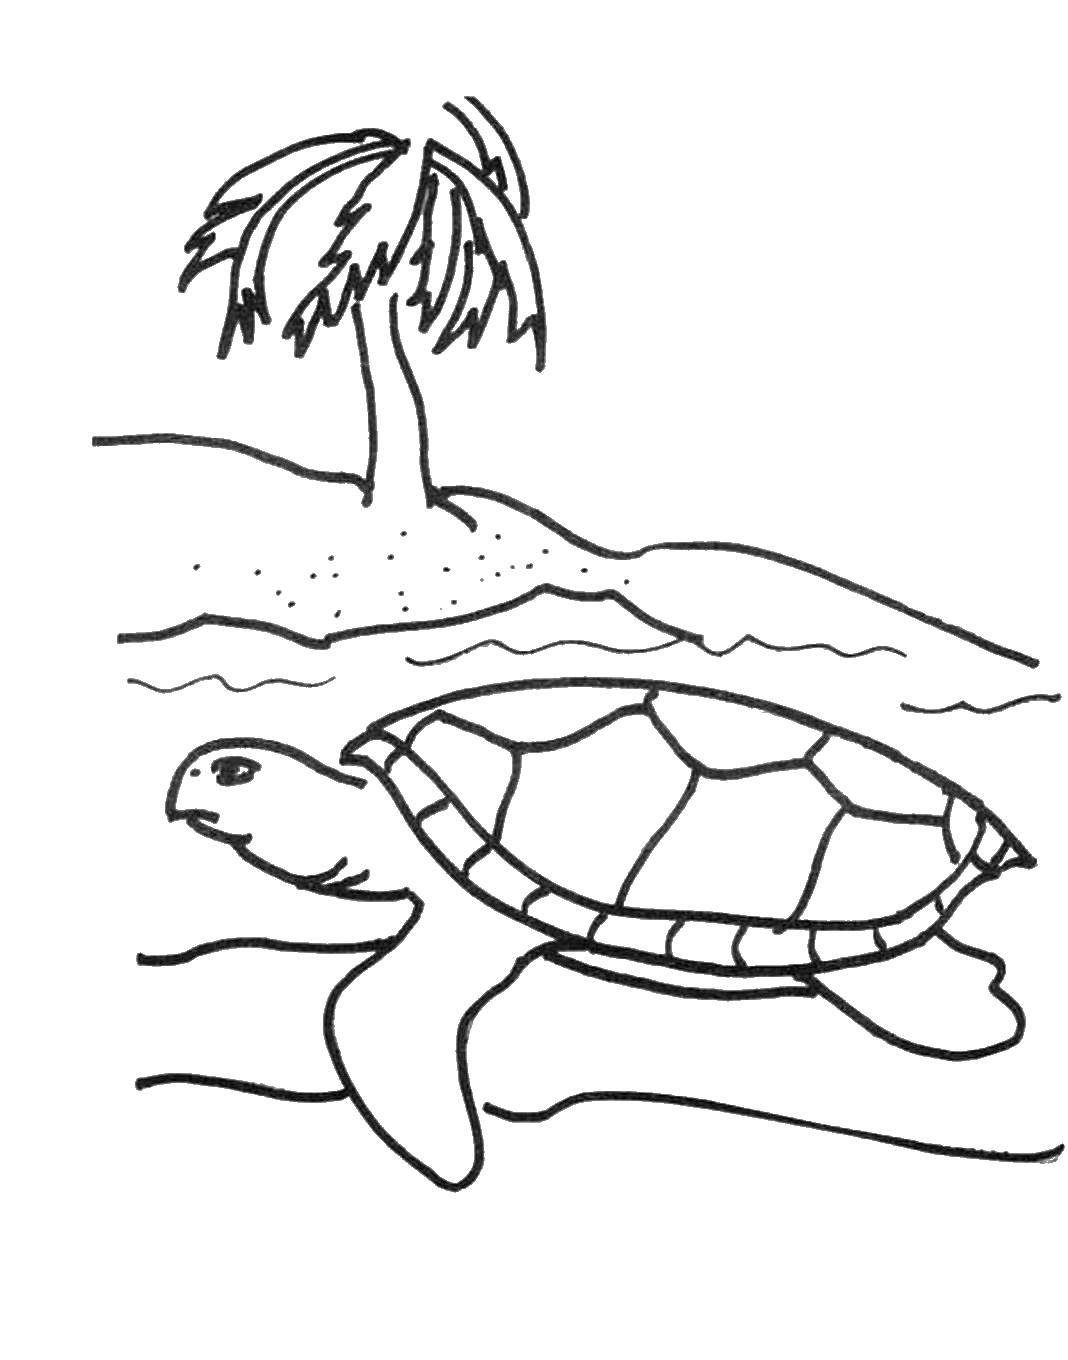 Coloring Sea turtle. Category marine animals. Tags:  Reptile, turtle.